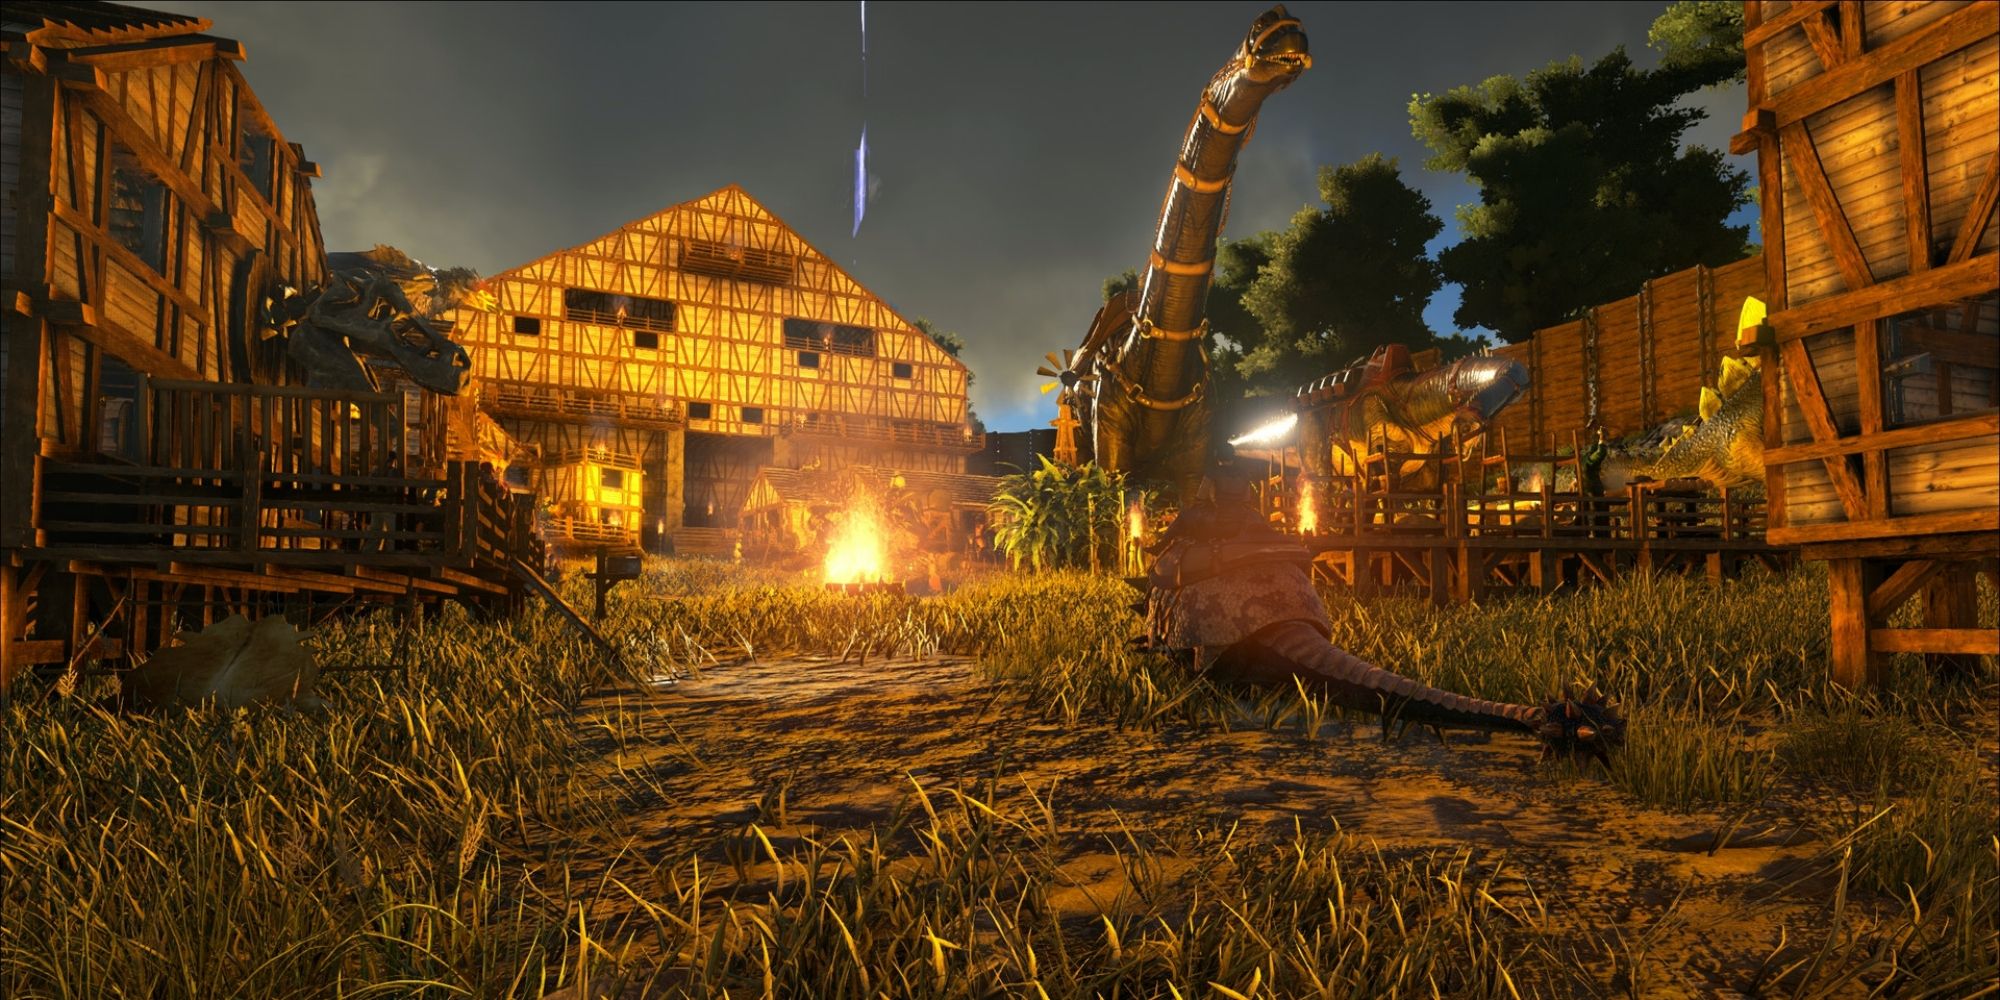 Several player buildings in an older style along with a few tamed dinosaurs